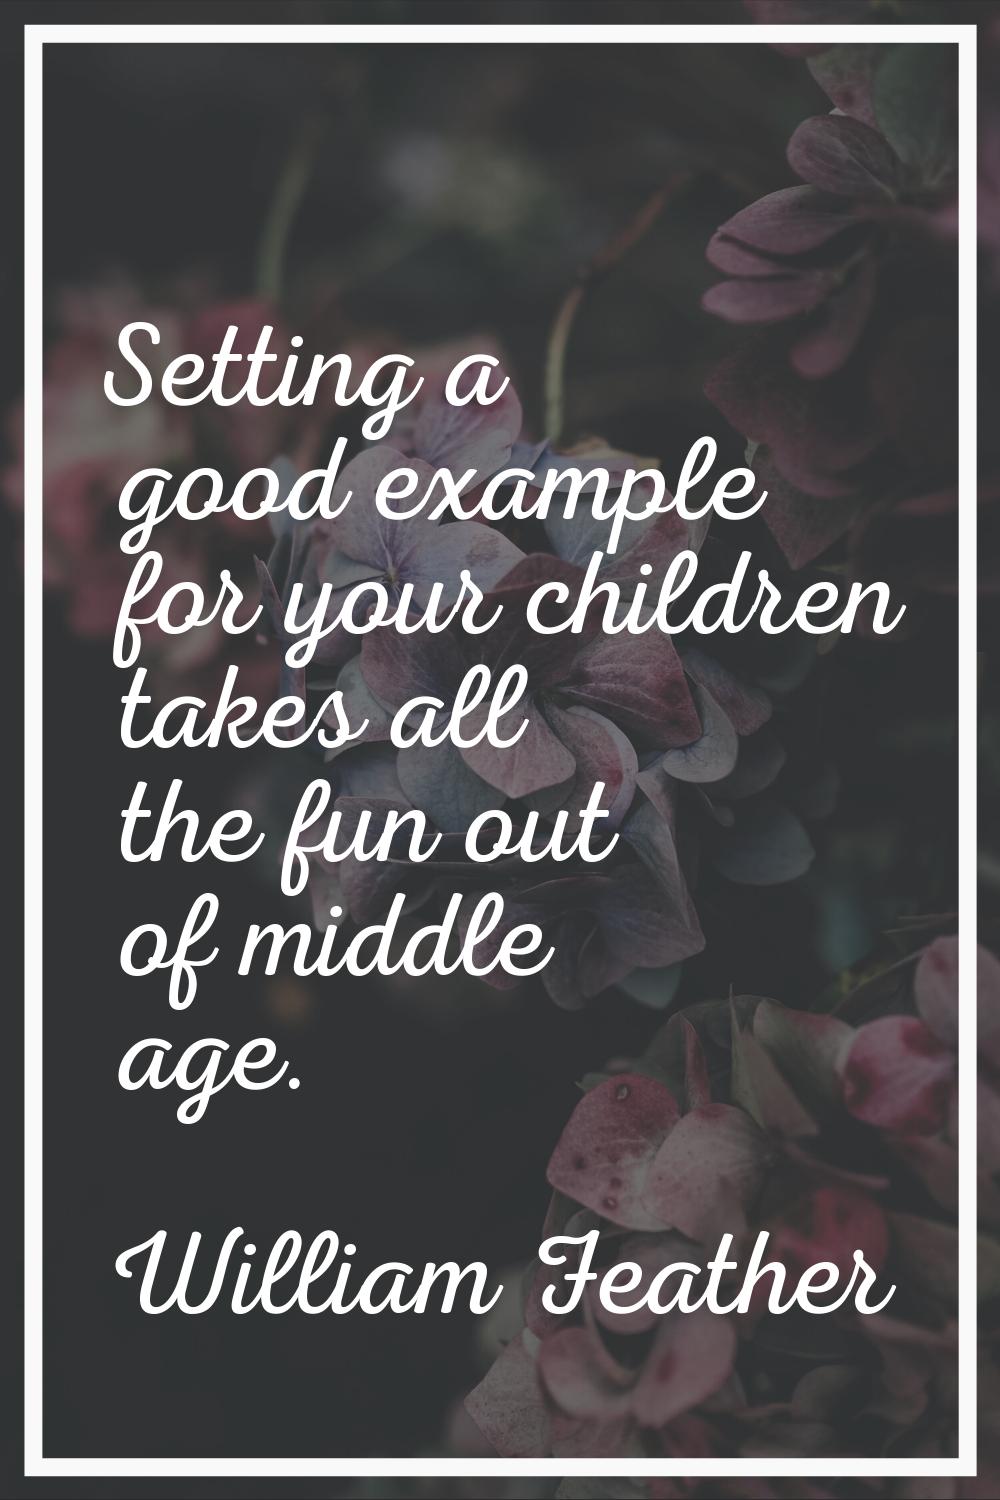 Setting a good example for your children takes all the fun out of middle age.